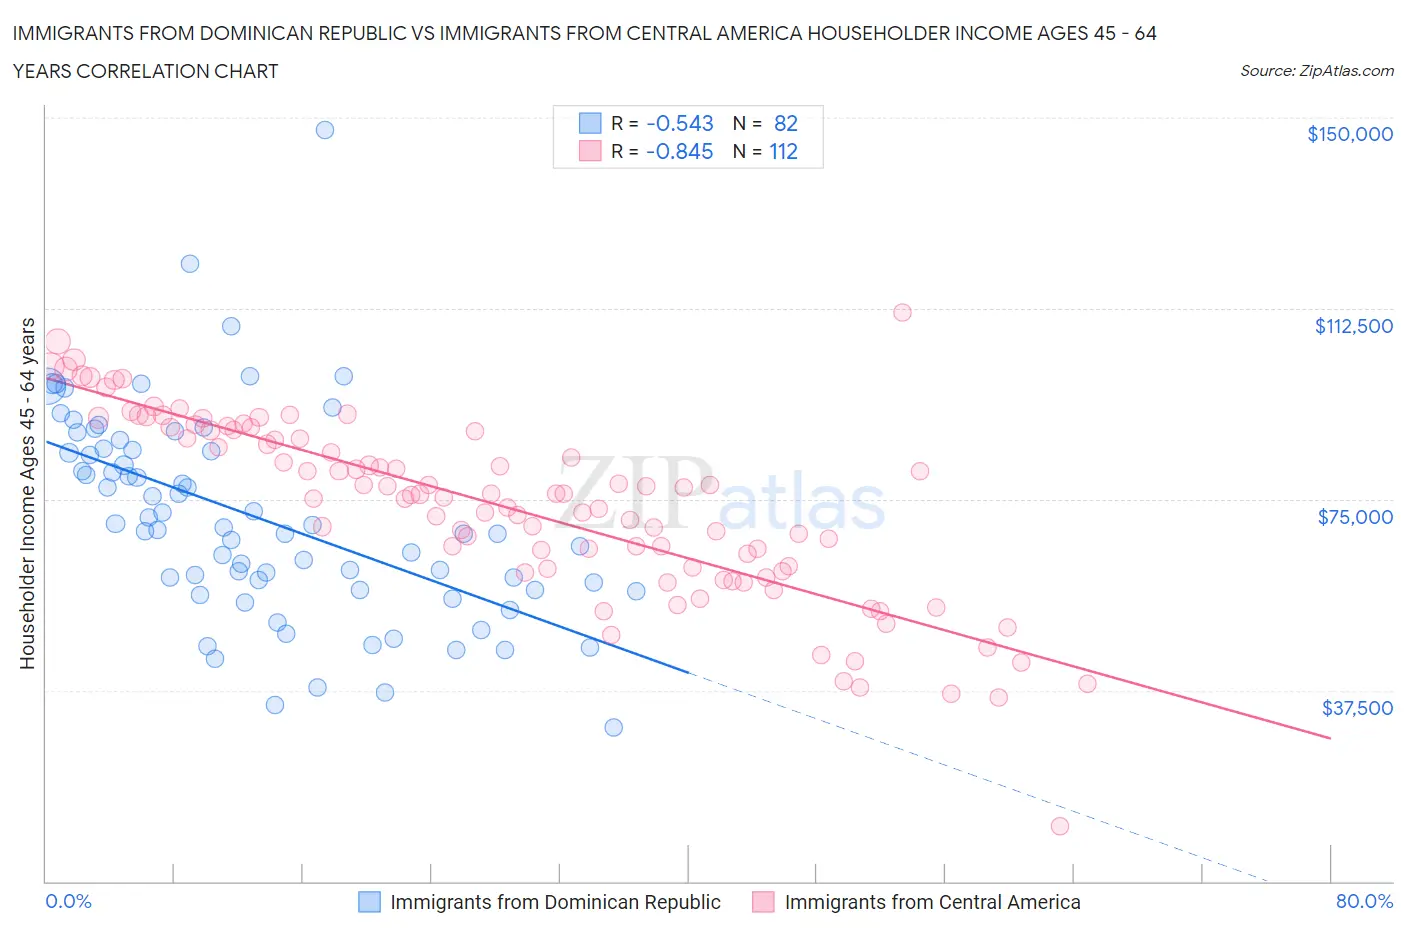 Immigrants from Dominican Republic vs Immigrants from Central America Householder Income Ages 45 - 64 years